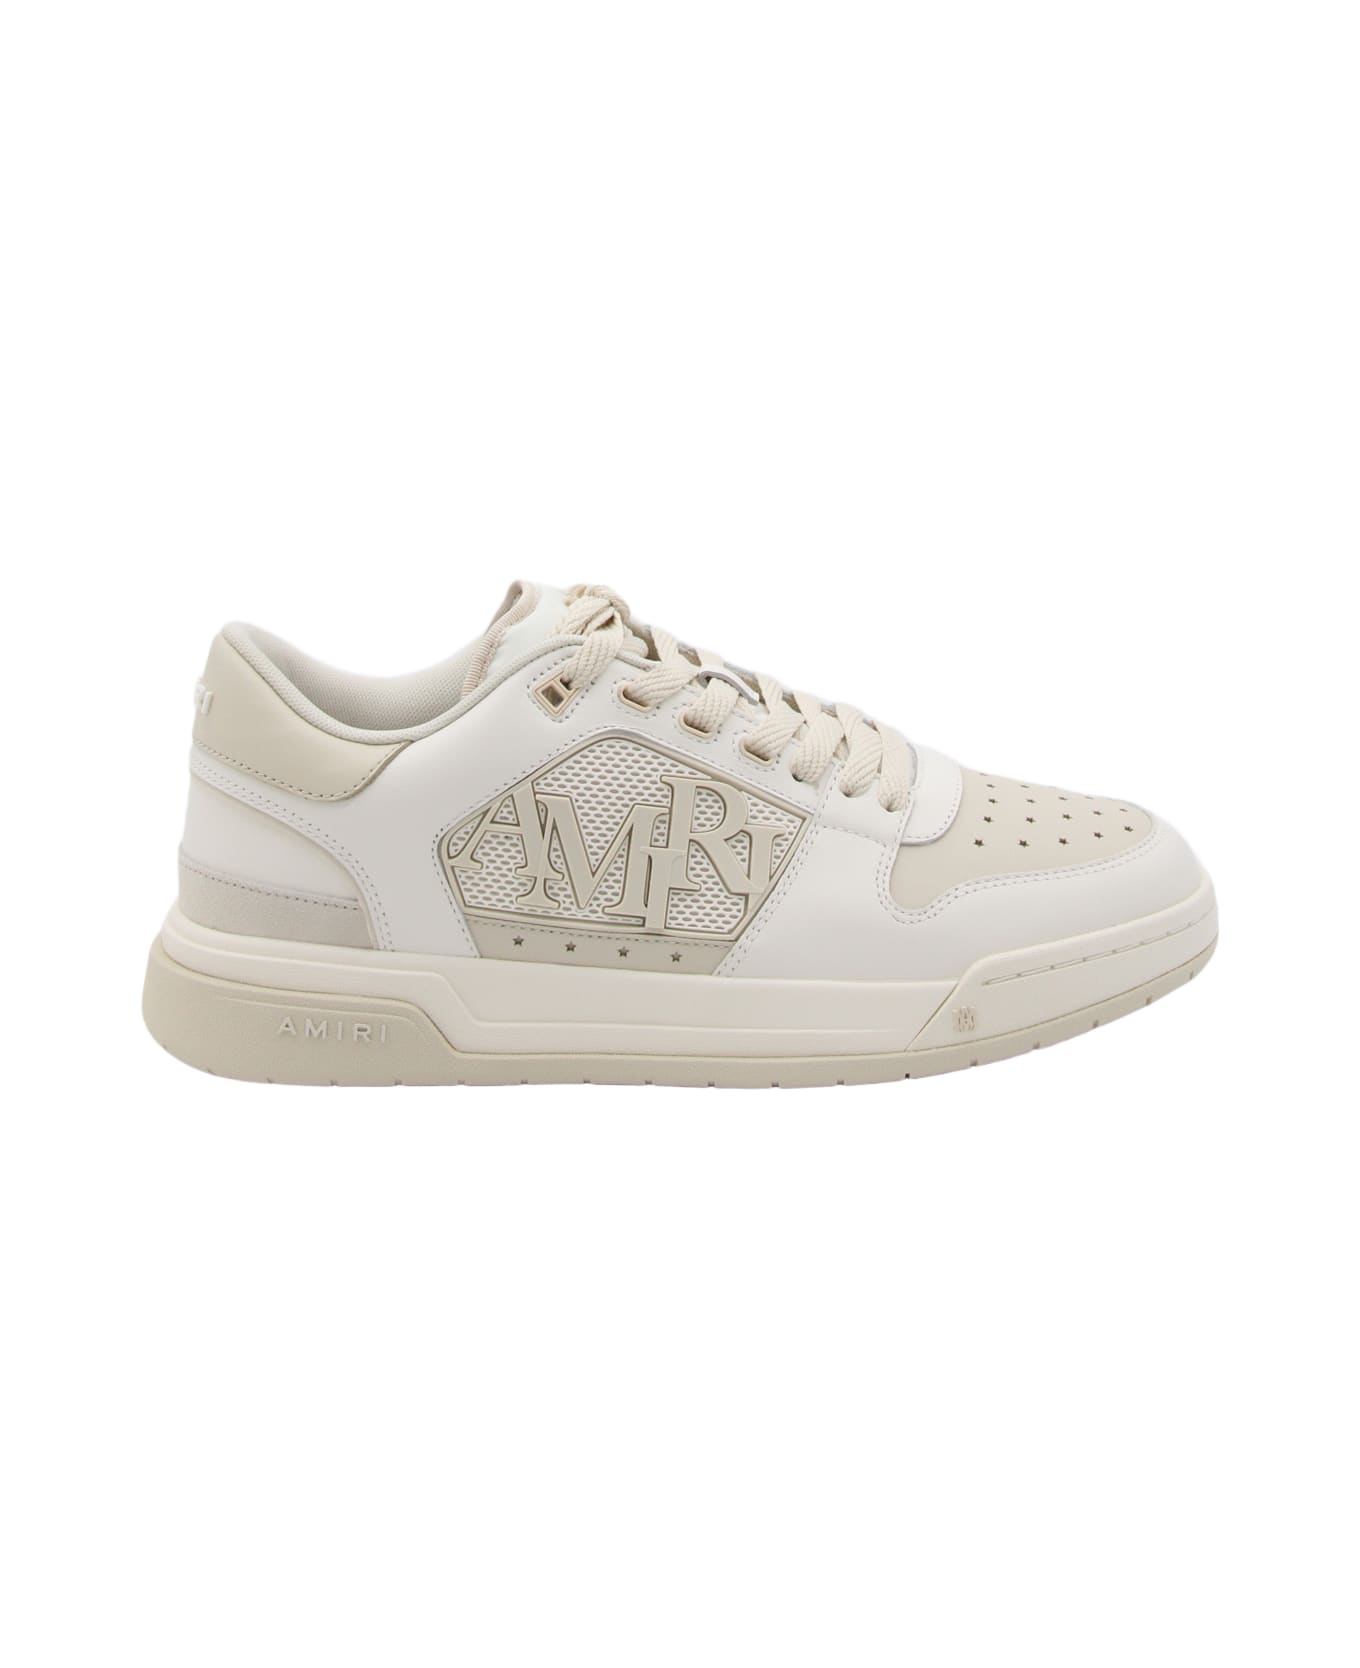 AMIRI White Leather Sneakers - ALABASTER スニーカー